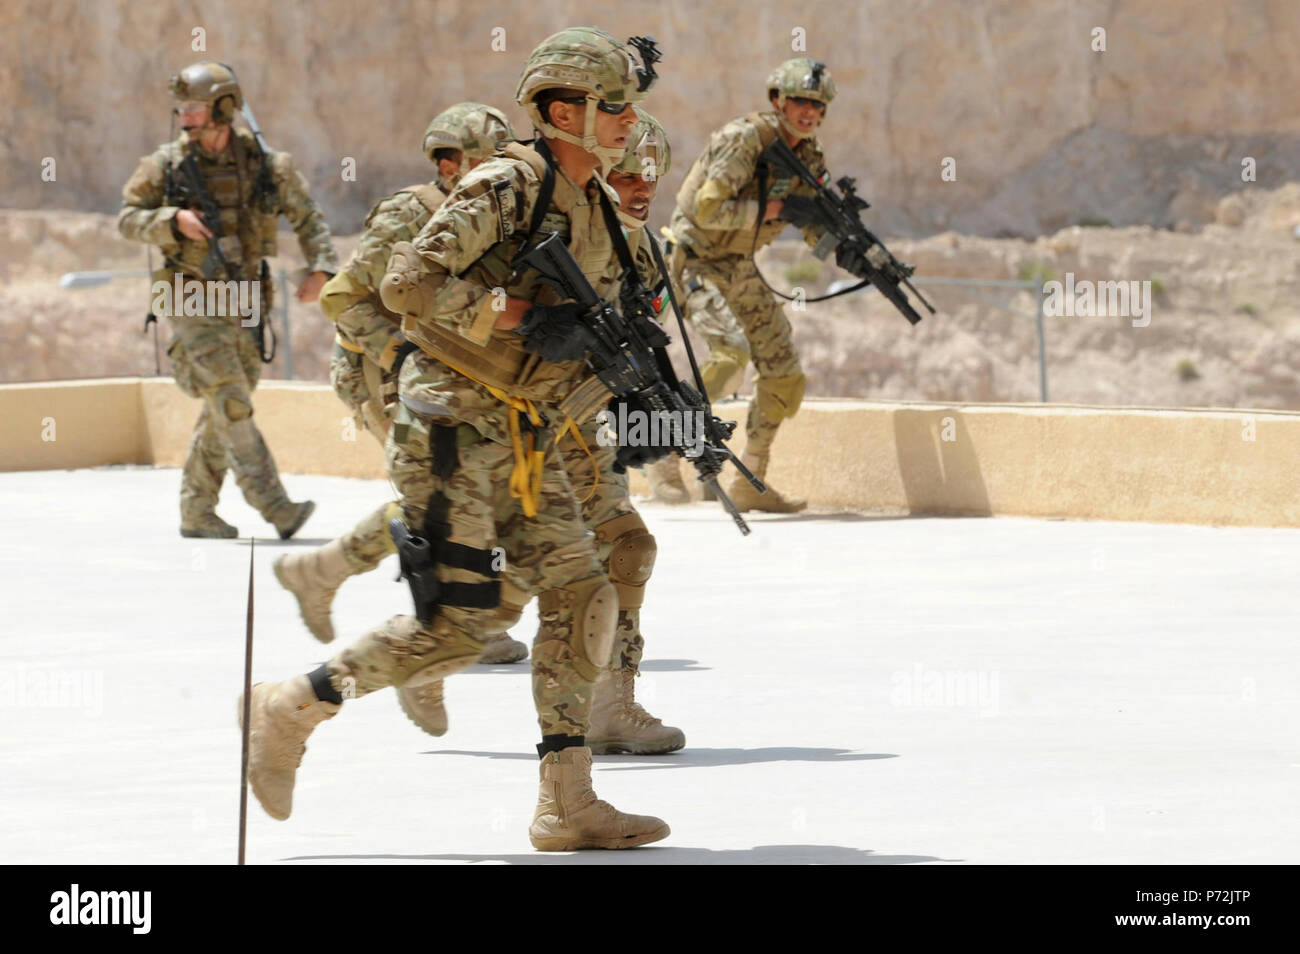 Jordan (May 11, 2017) Members of the Jordanian Armed Forces Special Task Force and U.S. Air Force Special Operations, fast rope drop on to a building, during an interoperability combat search and rescue training at the King Abdullah II Special Operations Training Center, as part of Exercise Eager Lion. Eager Lion is an annual U.S. Central Command exercise in Jordan designed to strengthen military-to-military relationships between the U.S., Jordan and other international partners. This year's iteration is comprised of about 7,200 military personnel from more than 20 nations that will respond to Stock Photo